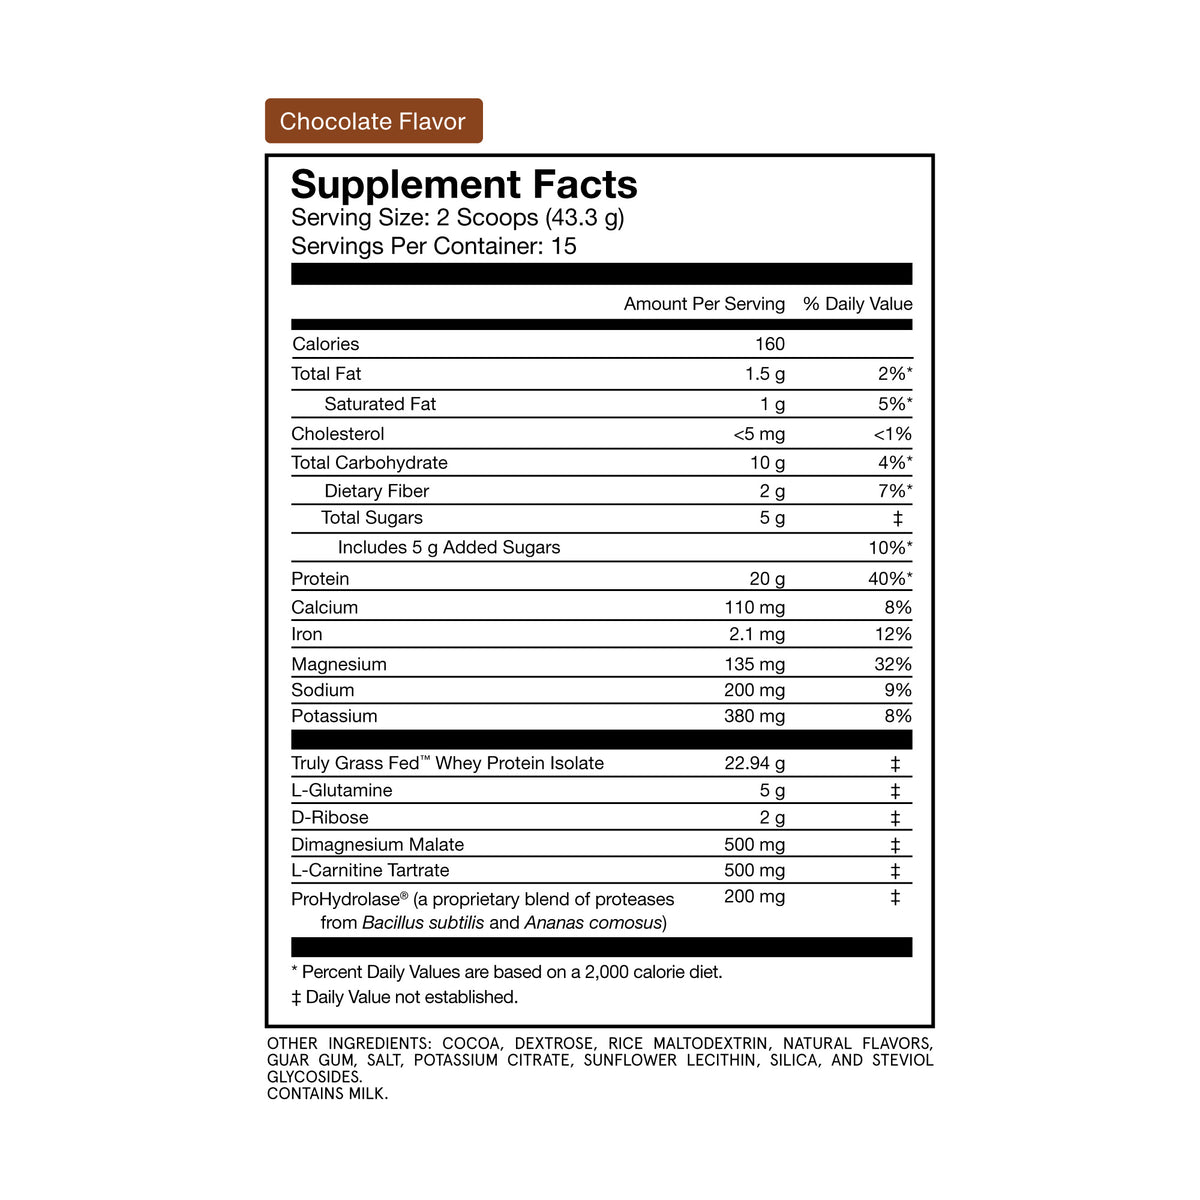 Chocolate flavored Recovery Supplement Facts